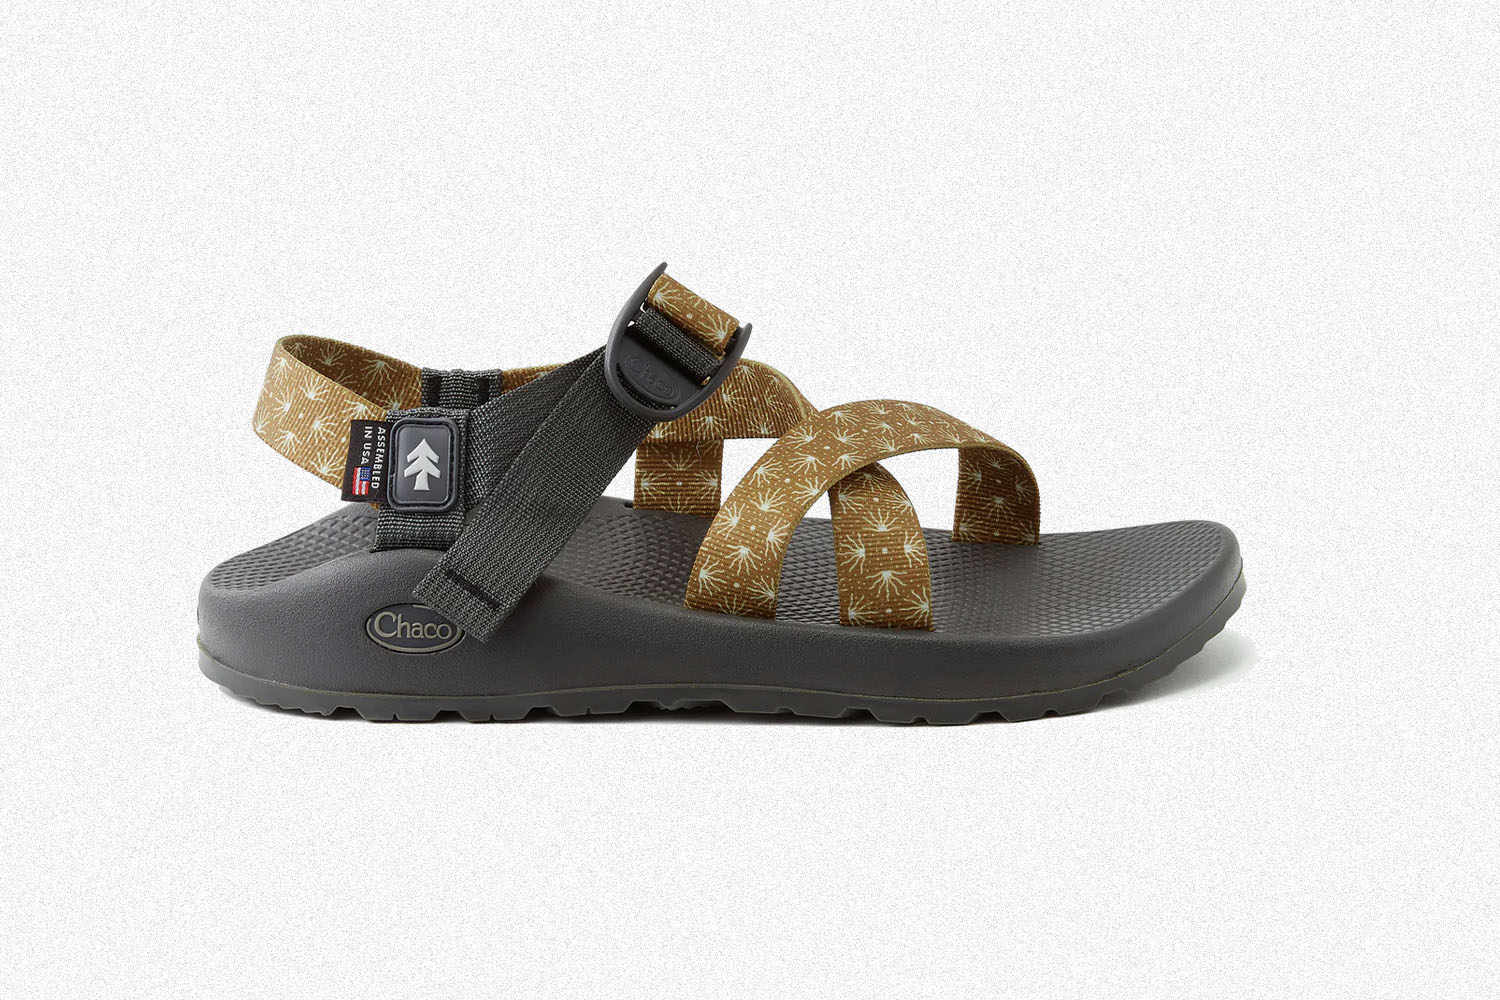 Huckberry x Chaco Agave Collection